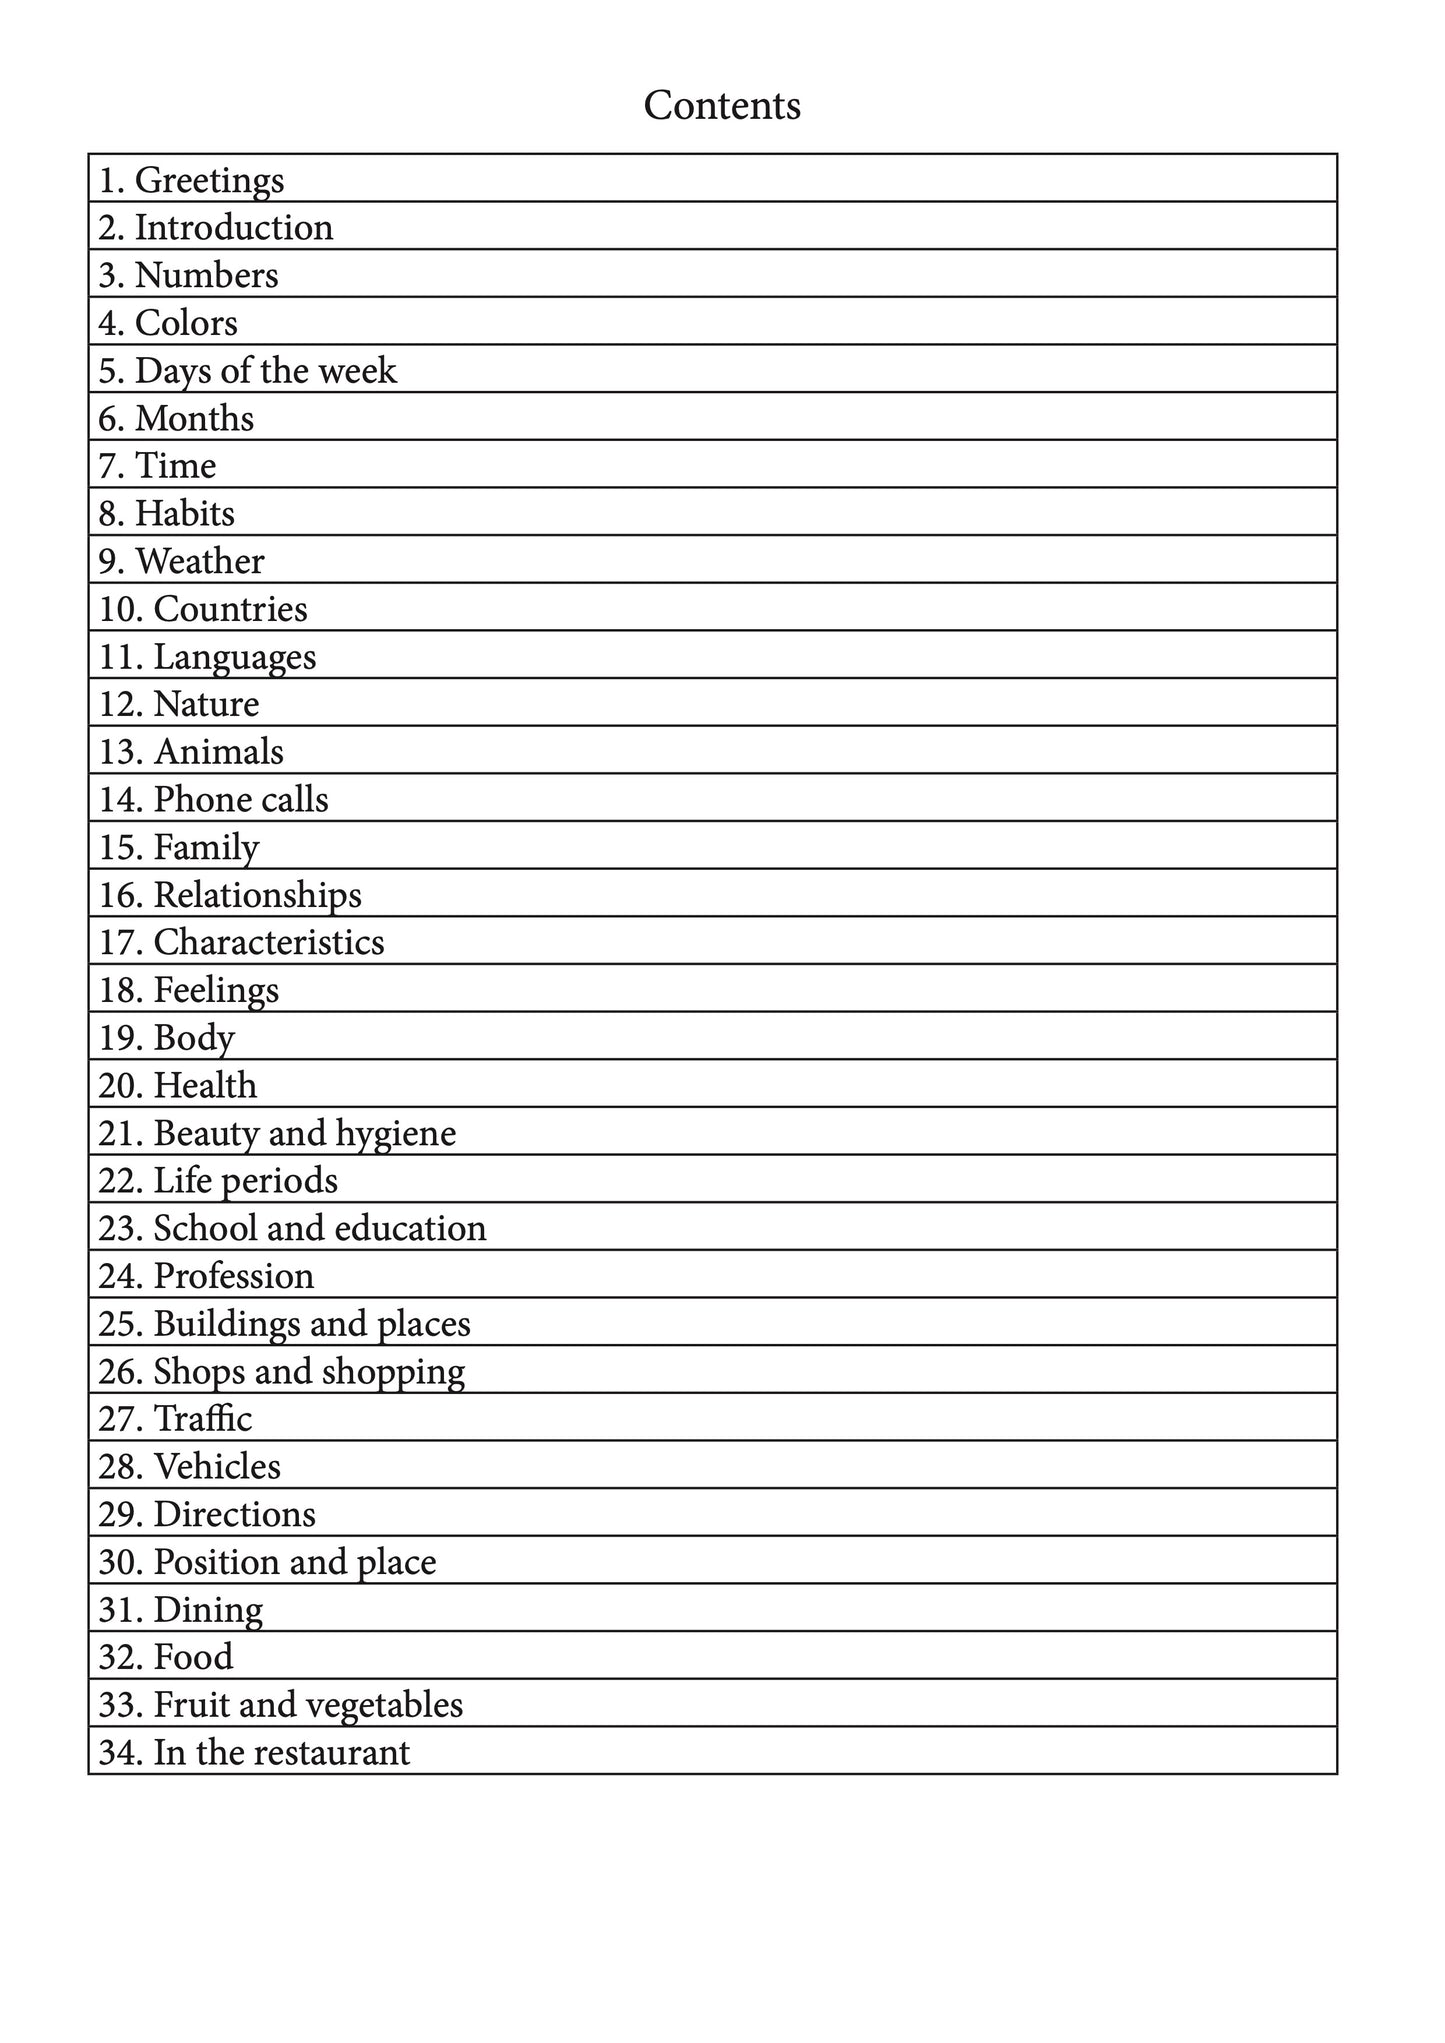 Ultimate Language Notebook language learning notebook contents page 1